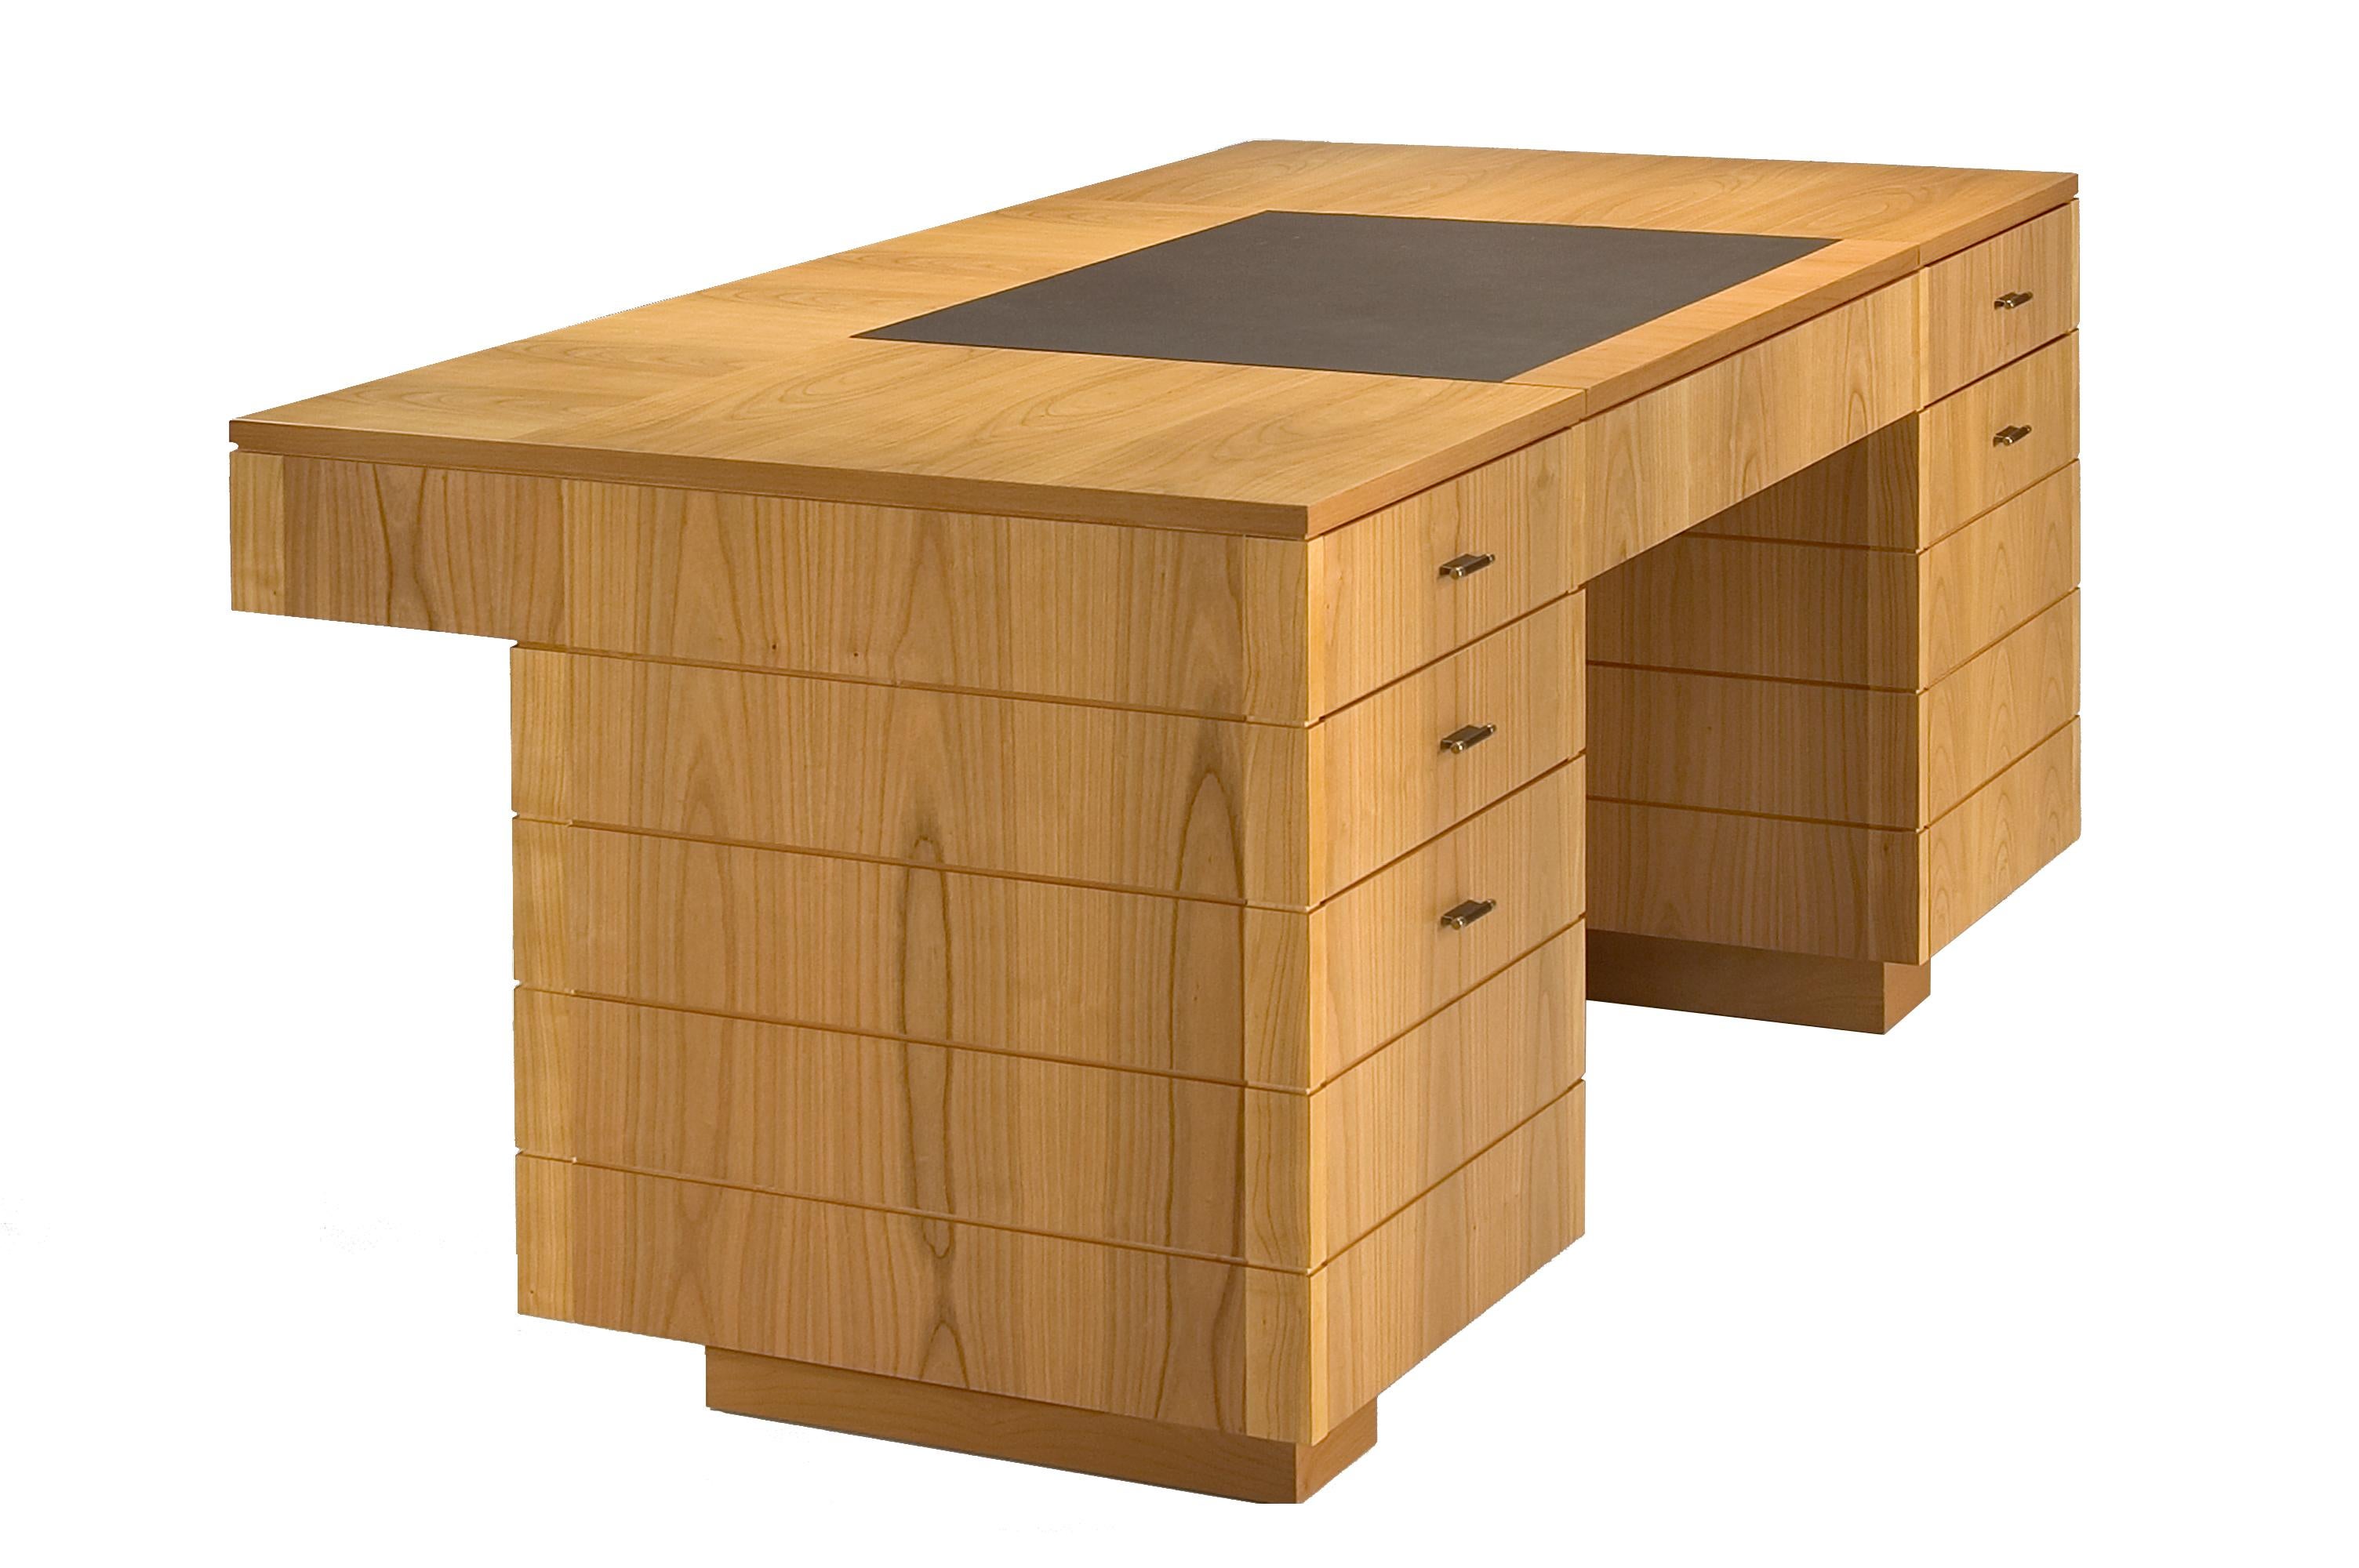 Wooden Desk Made of Cherry Wood with Leather Top and Drawers, by Morelato 4